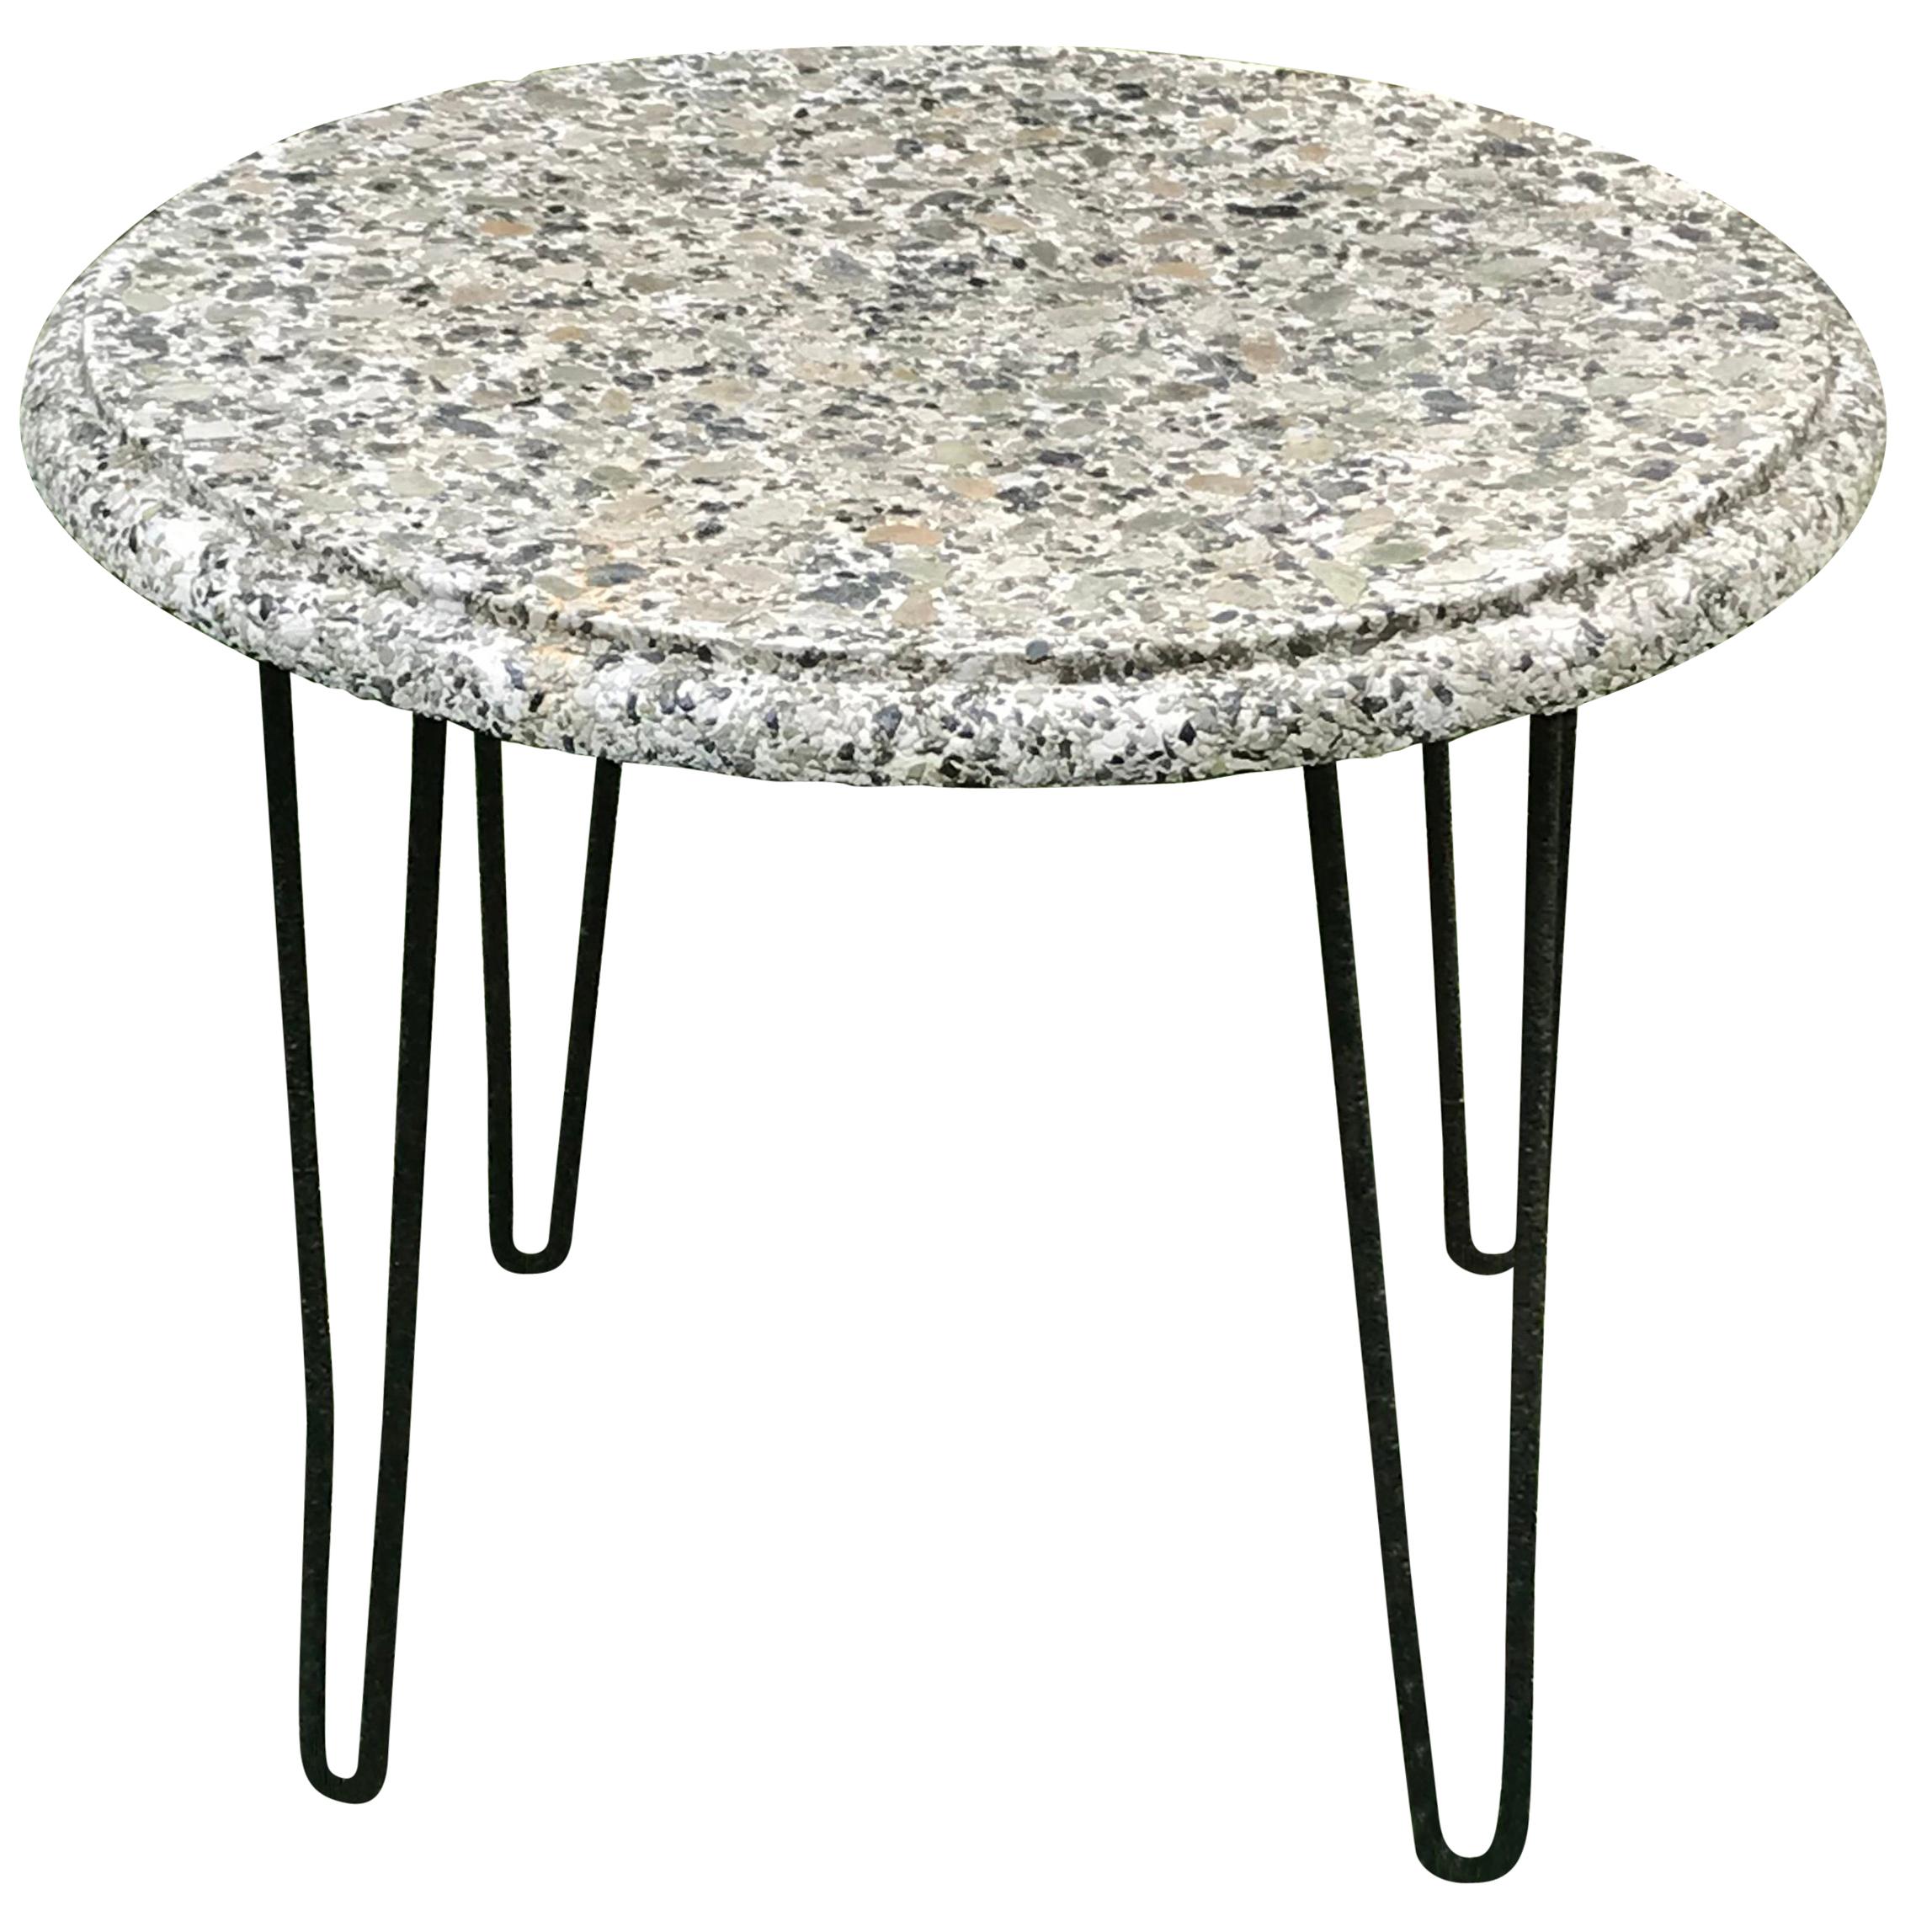 Mid Century Round Stone Top Table with Hairpin Legs, Patio or Poolside, 1950s